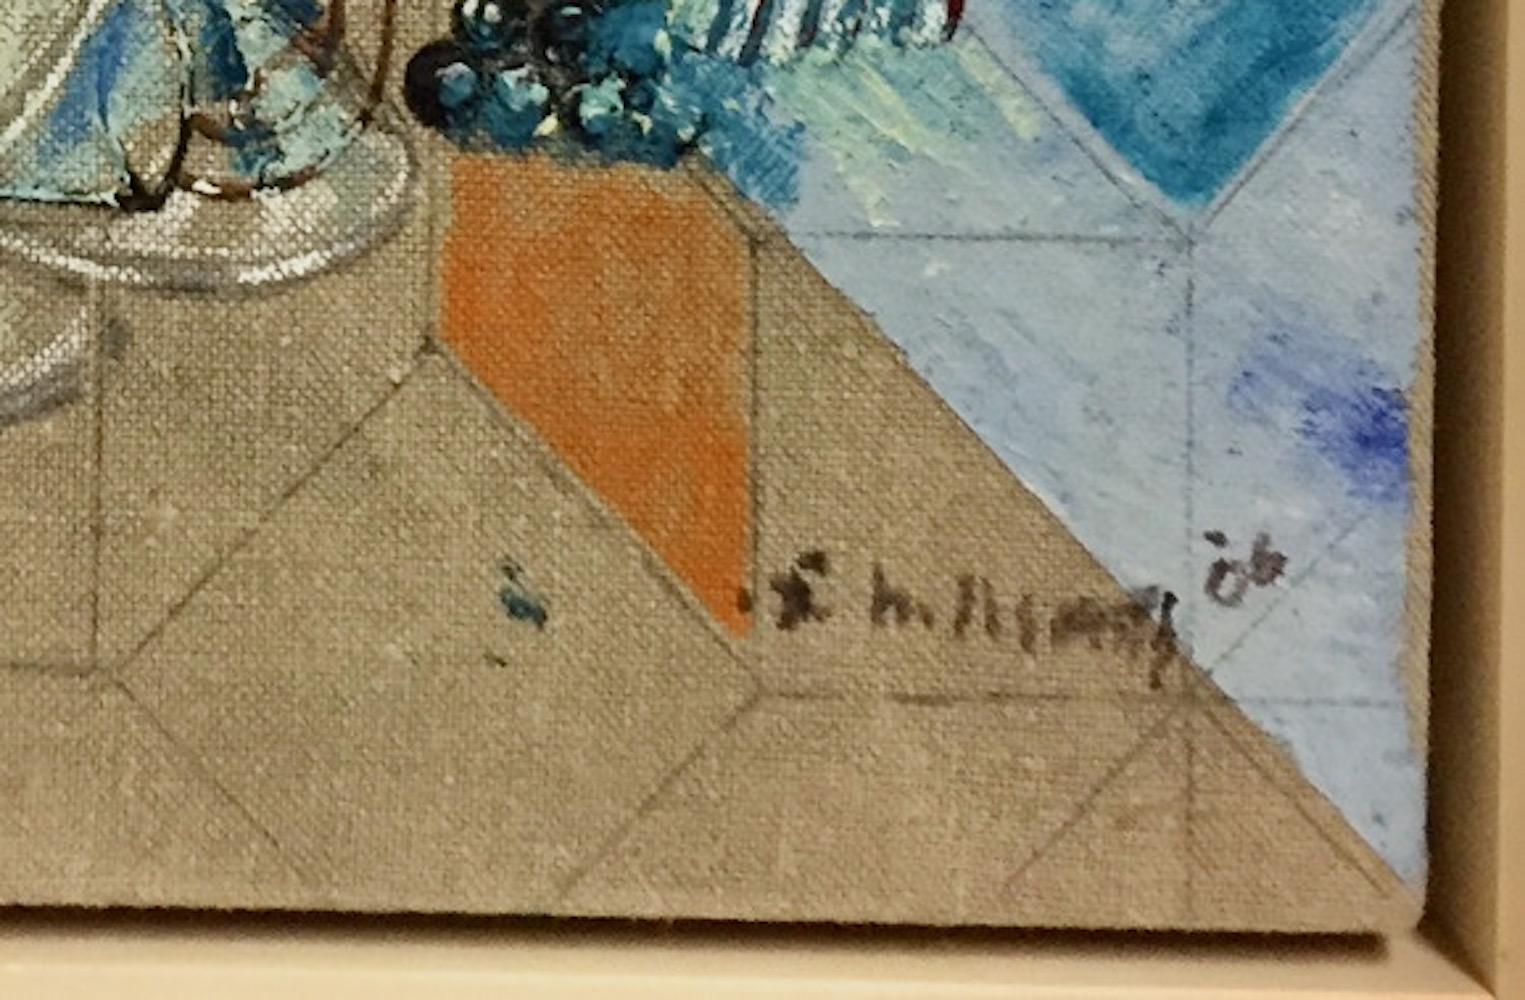 This is a painting on canvas. The intricate subject benefits from a second and third look as it becomes clear. It is signed and dated lower right. Hillsmith considered herself a career-long Cubist. For many years she spent six months in her New York